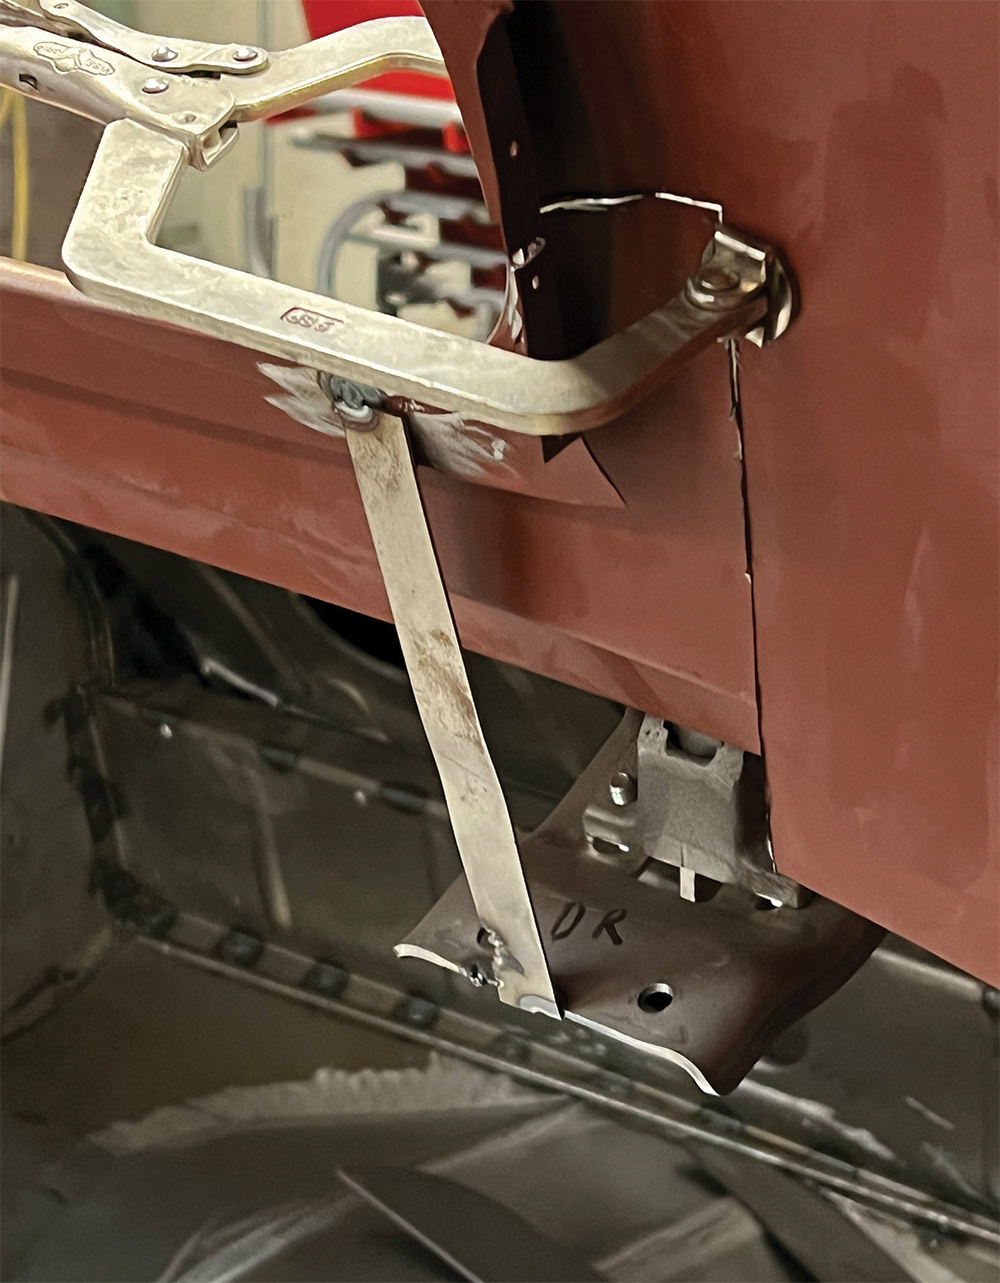 Temporary roof clamp for alignment